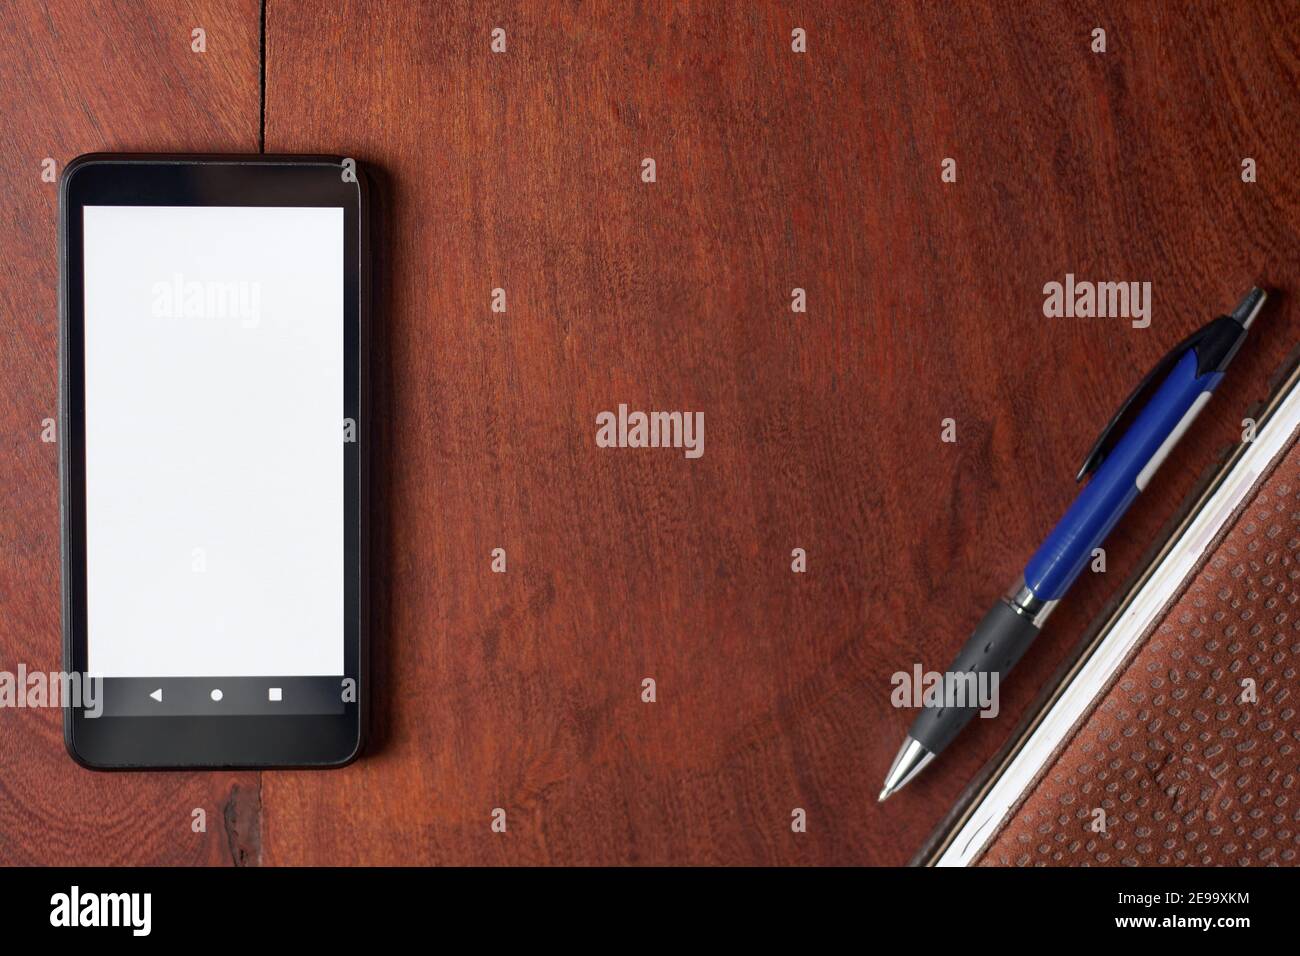 Black mobile phone with blank white screen, pen and notebook on rustic wooden table. Minimalistic top view of office setup with space for text. Work f Stock Photo